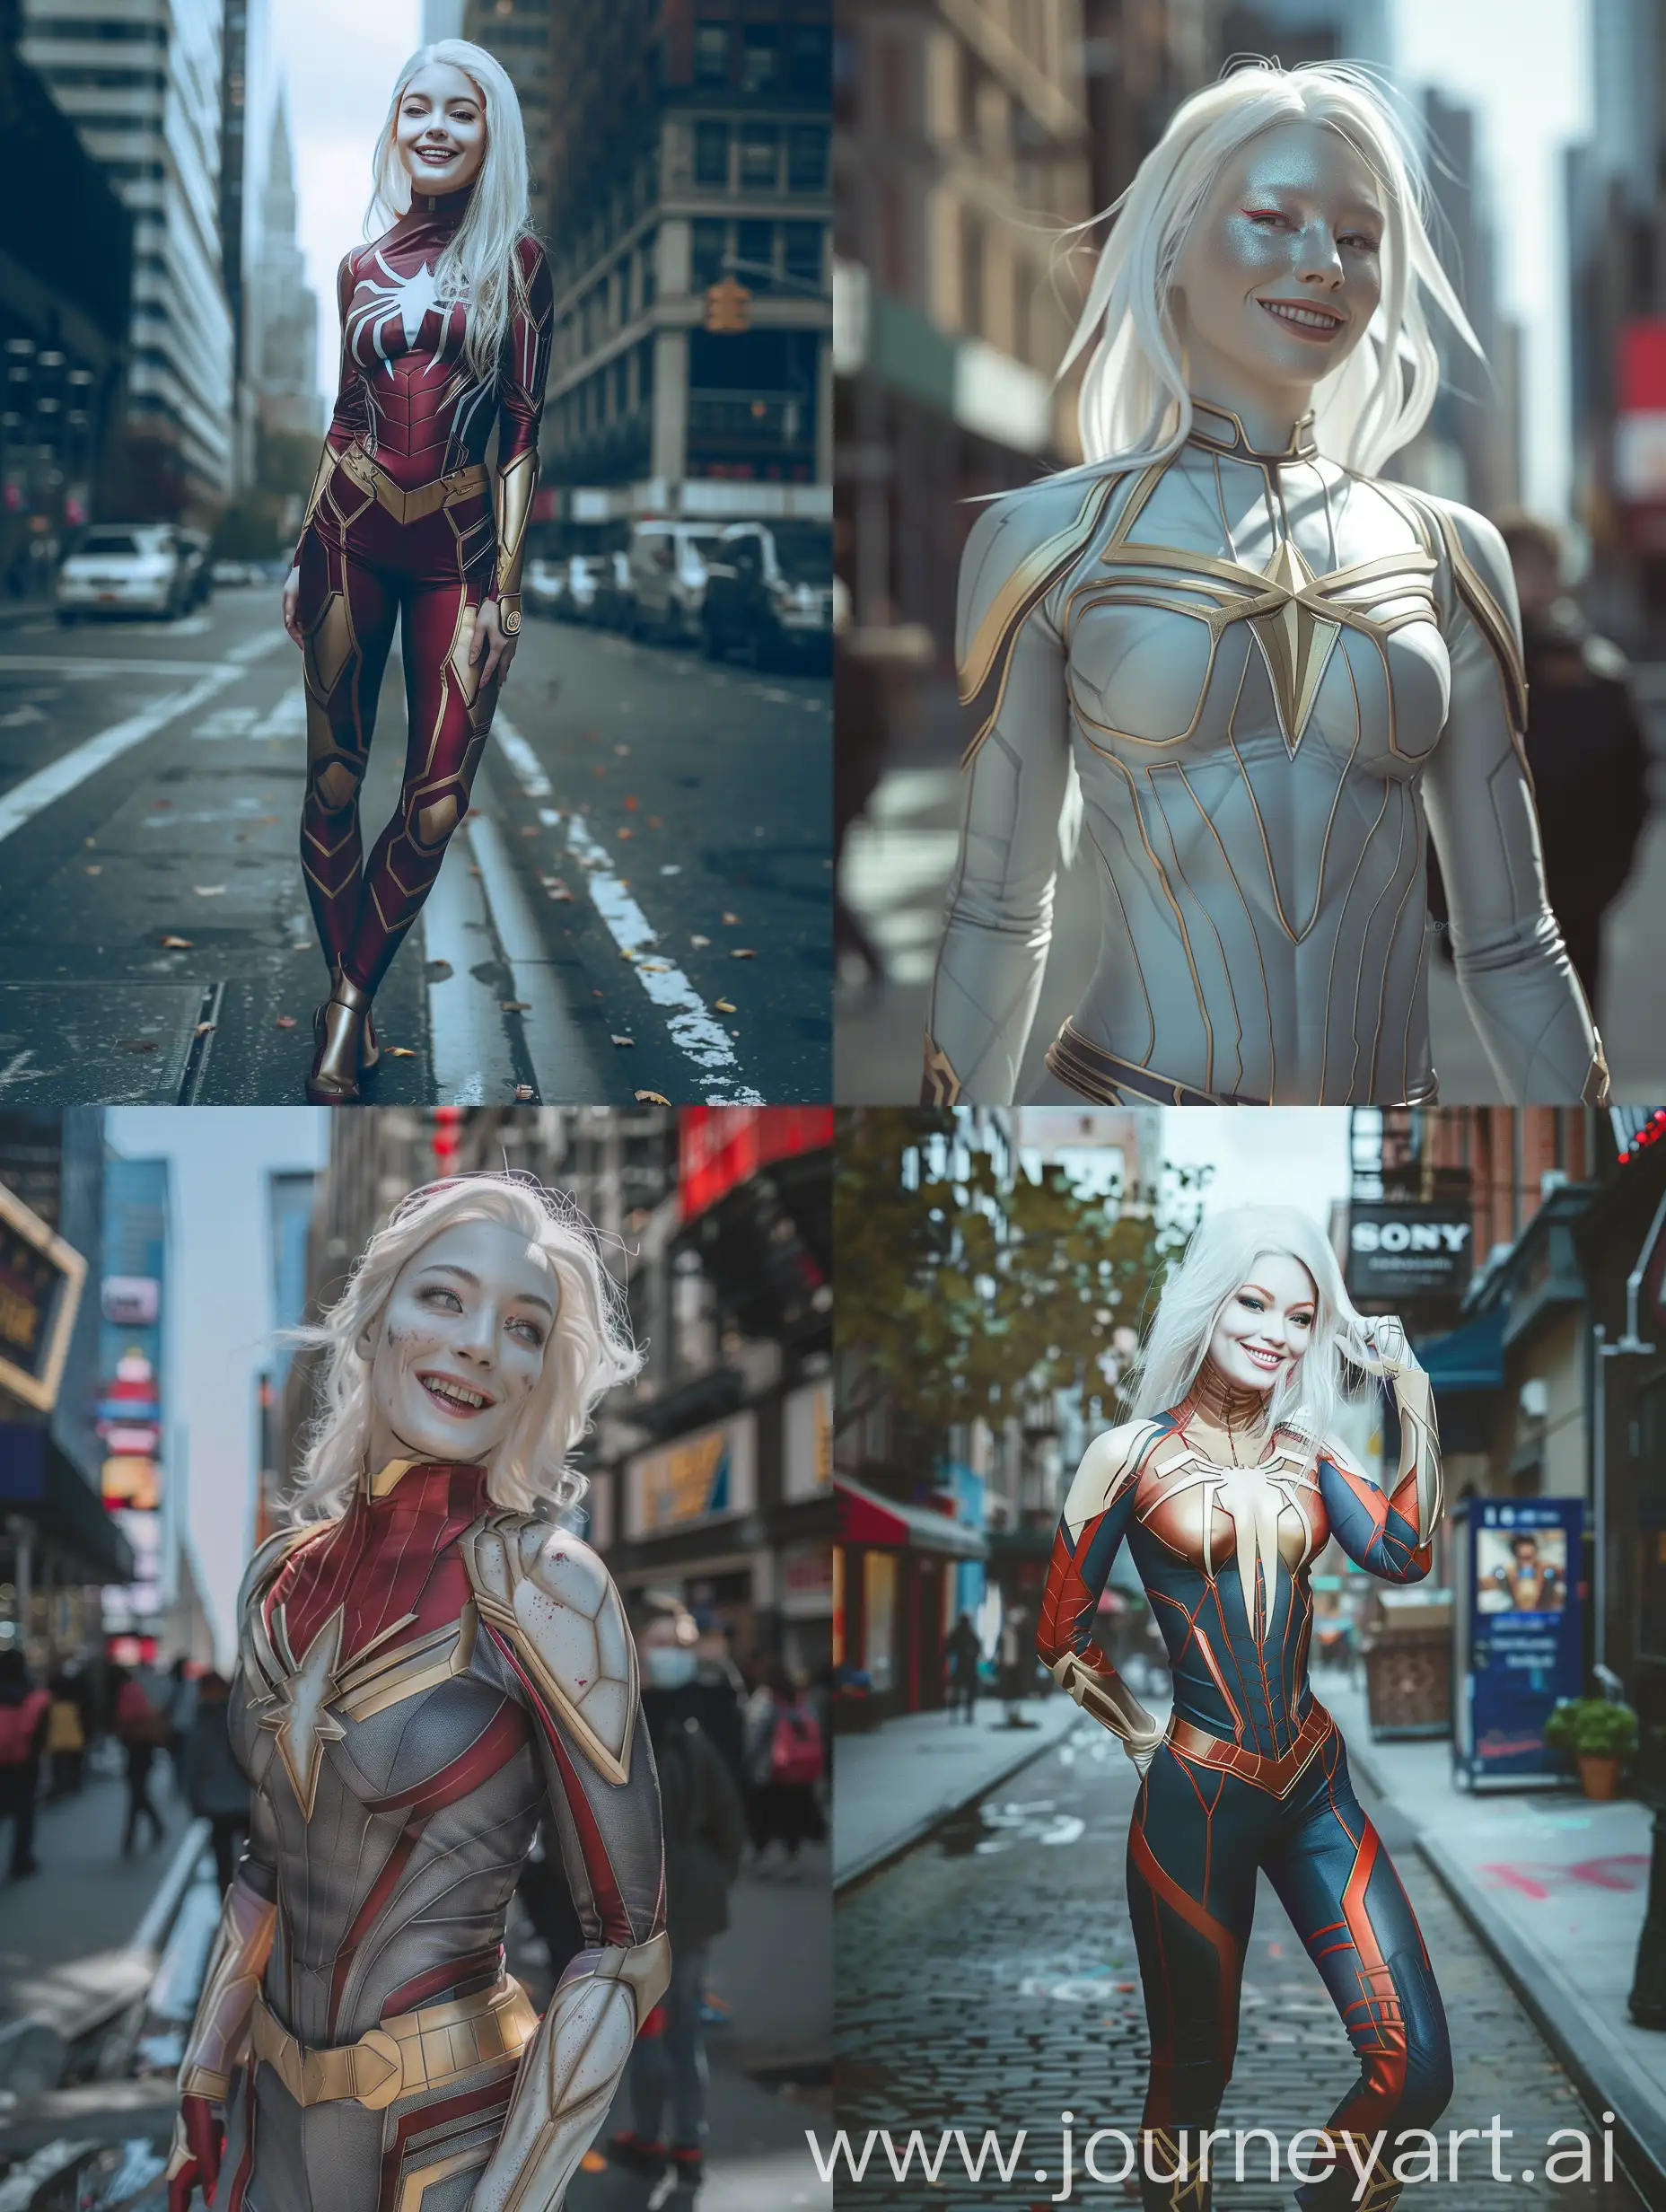 Mesmerizing-Superheroine-Stands-Proud-in-NYC-Street-UltraRealistic-Portrait